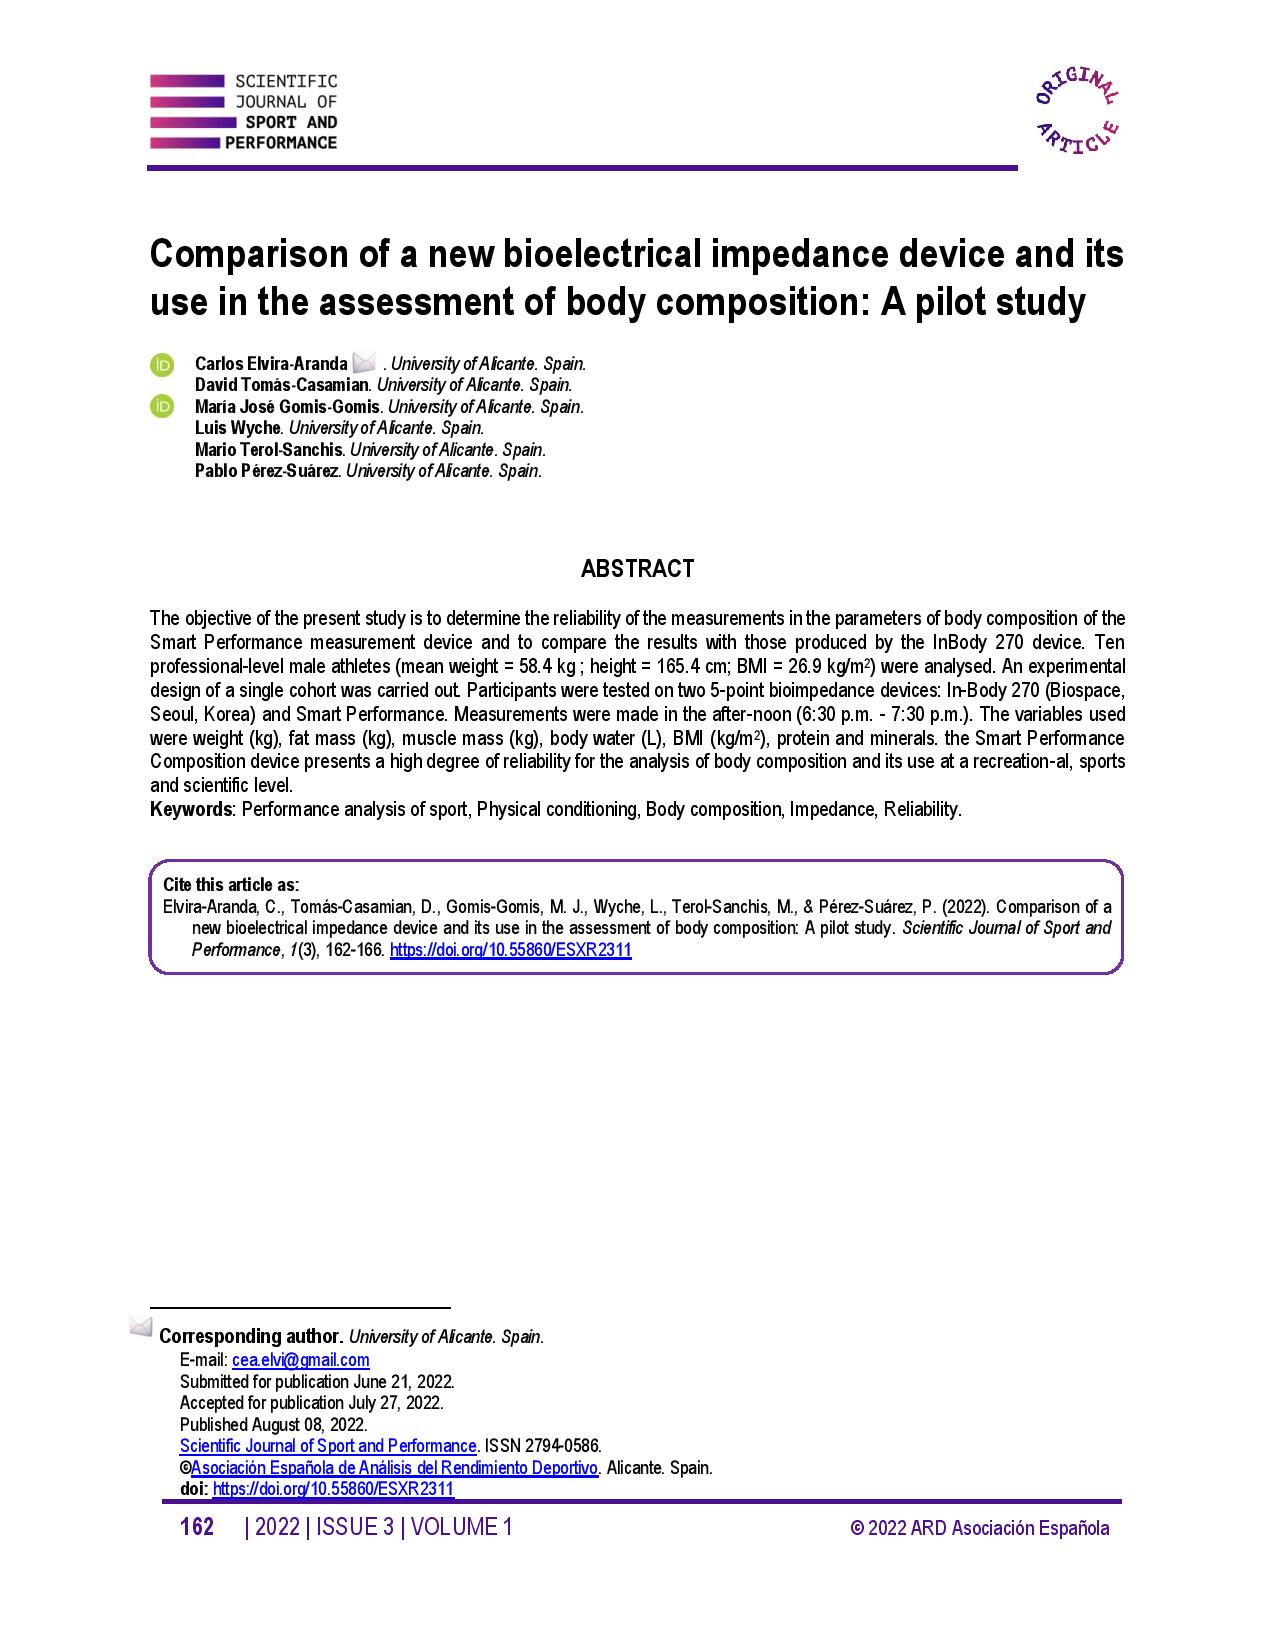 Comparison of a new bioelectrical impedance device and its use in the assessment of body composition: A pilot study